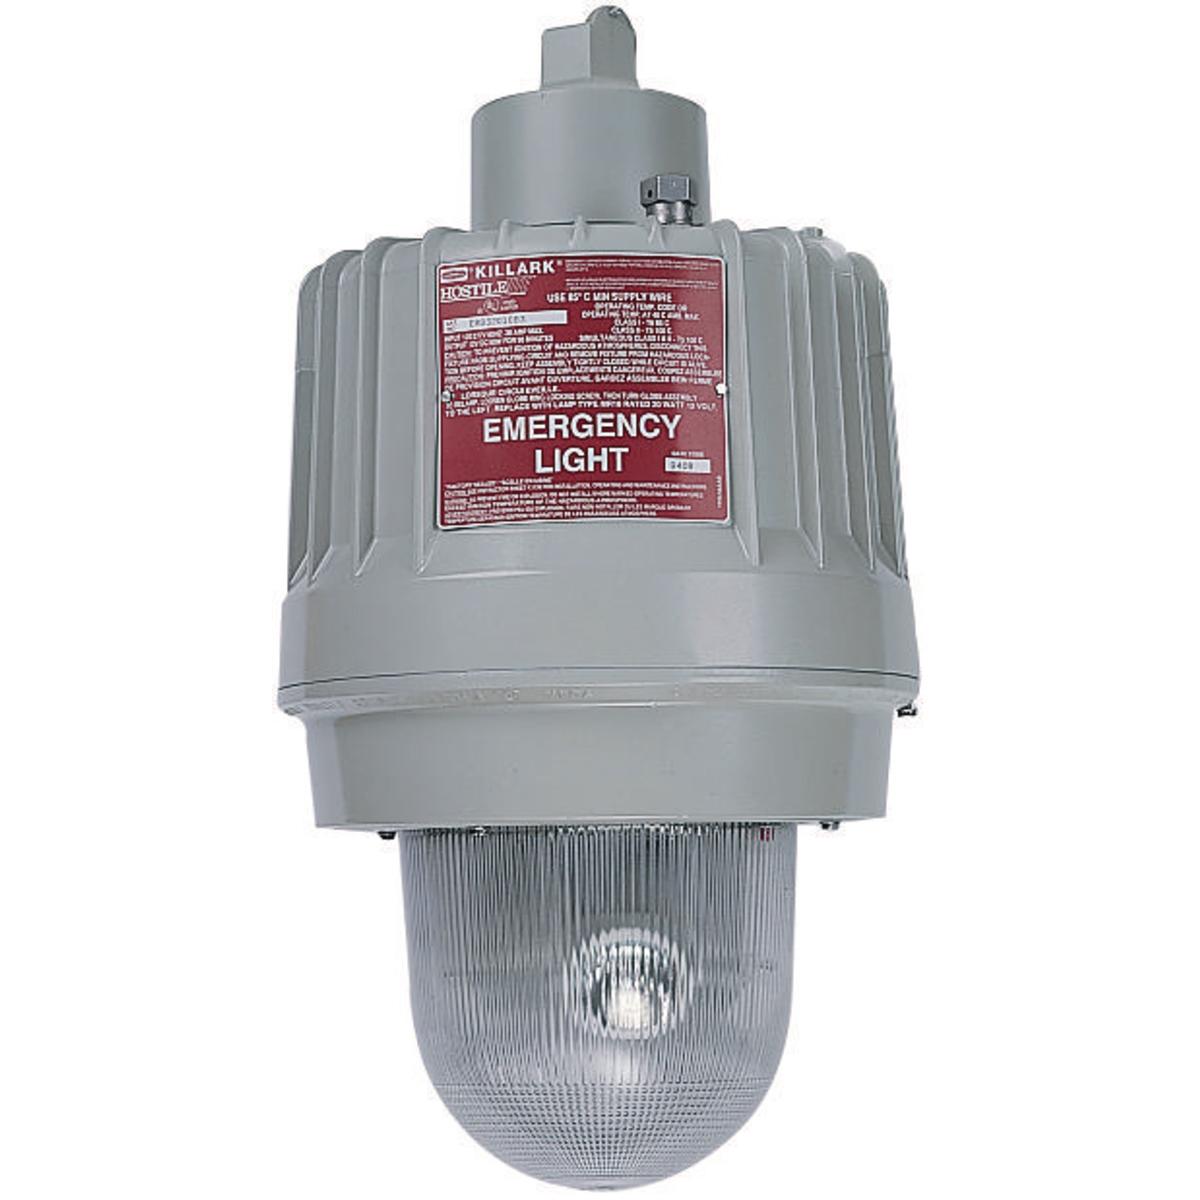 Hubbell EBB32010B3 Emergency Hazardous Location 1" Wall Mount  ; Patented design three high intensity lamps can be independently adjusted to provide custom emergency lighting to a specific area ; Three 20 watt MR16 lamps included ; Pendant, bracket and ceiling mounting styl